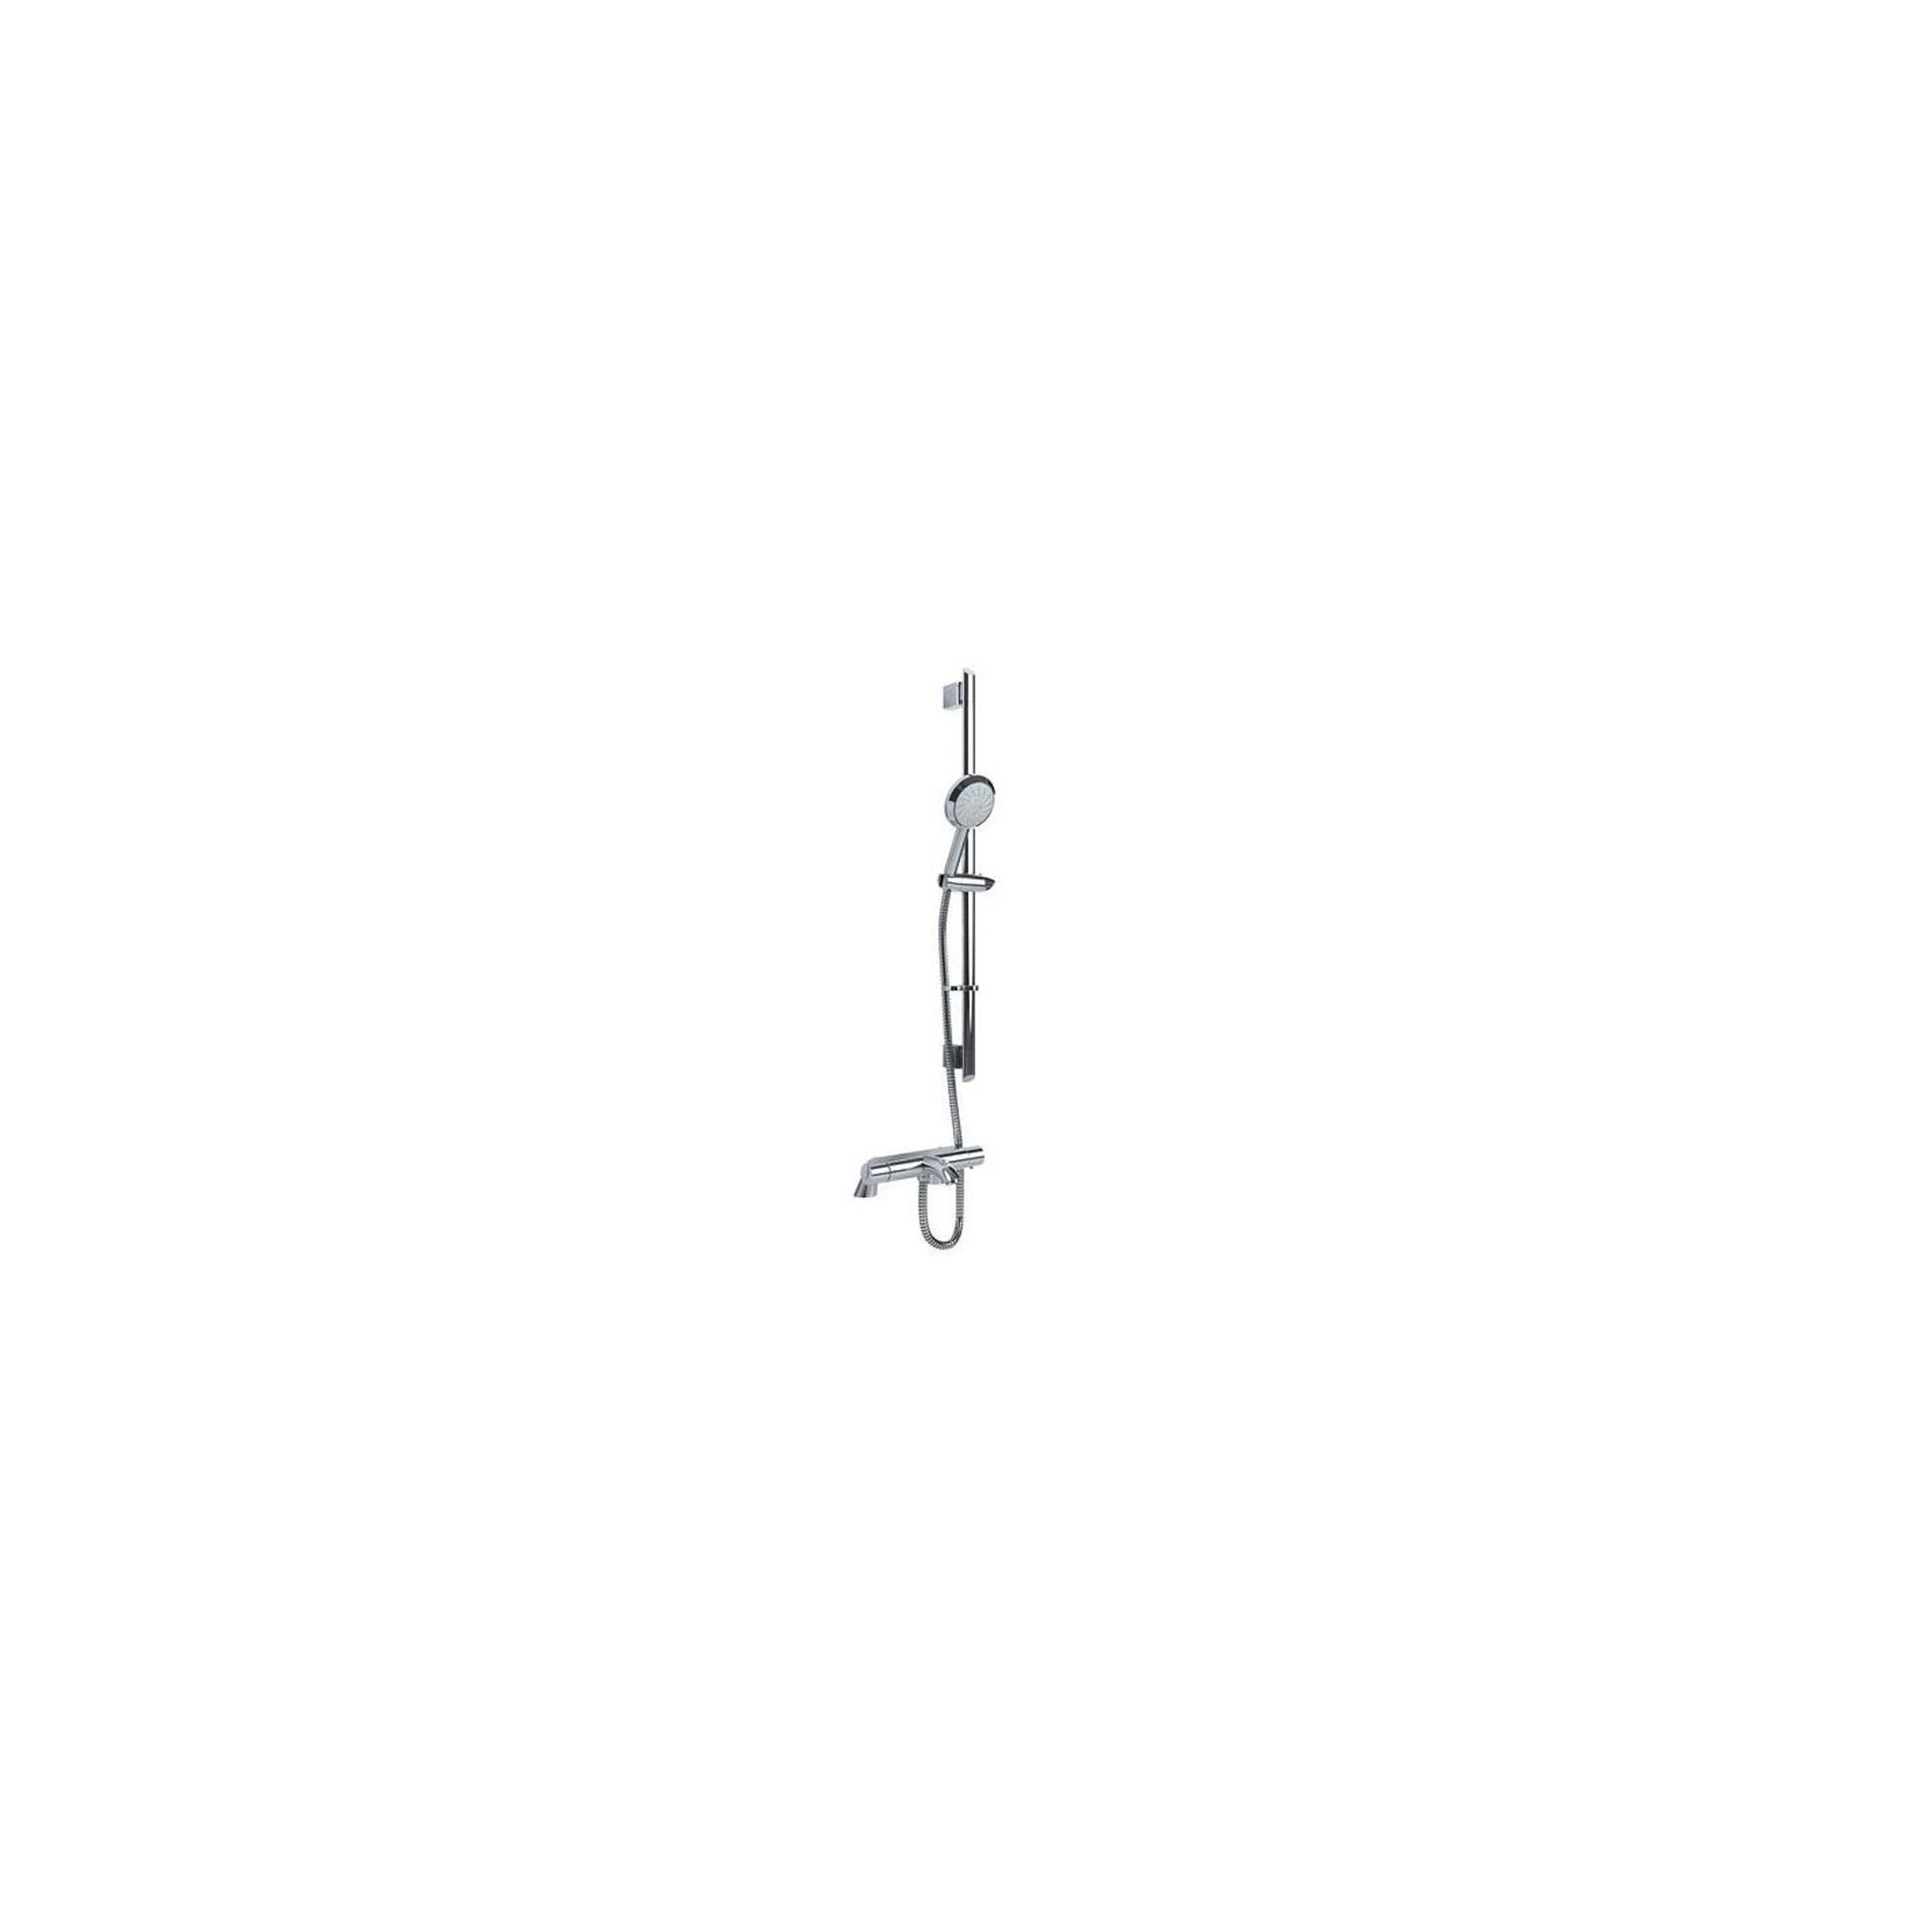 Inta Deluge Thermostatic Bath Shower Mixer Tap with Shower Kit and Legs Chrome at Tesco Direct